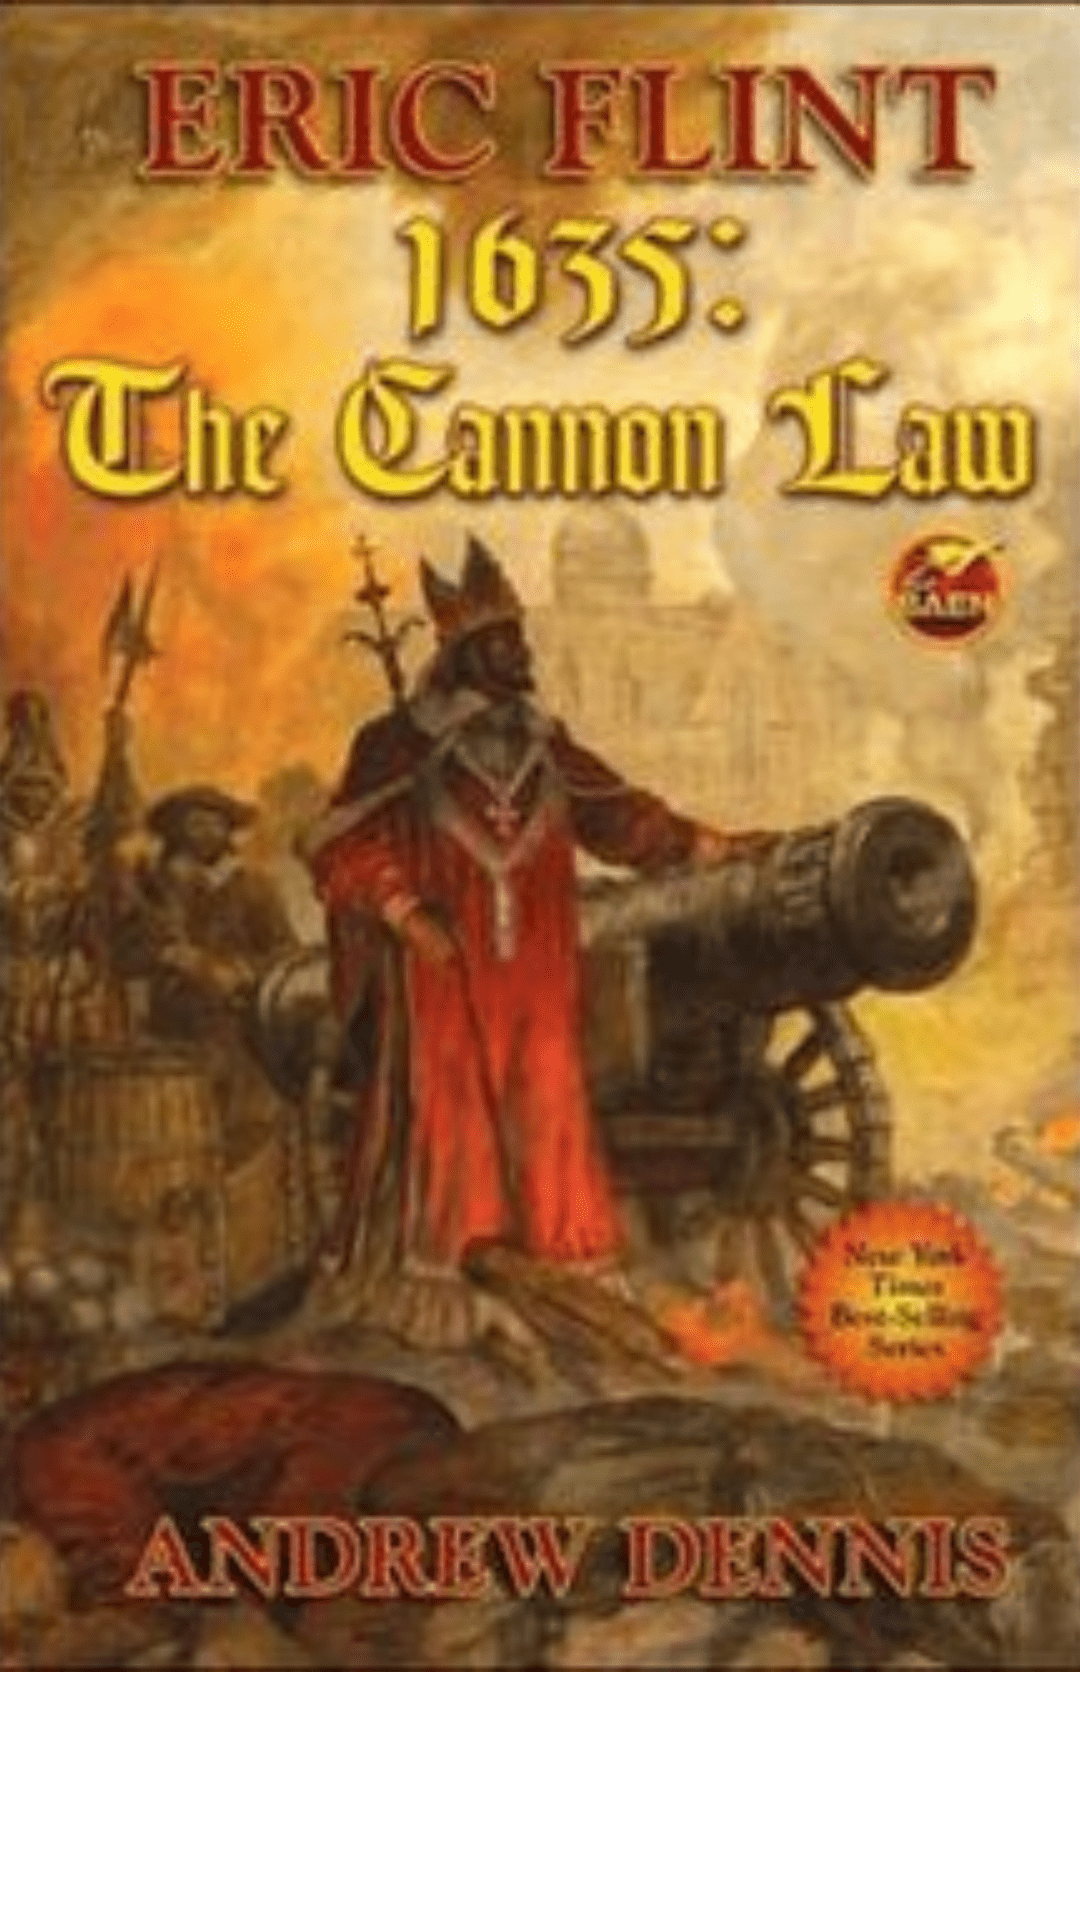 1635: Cannon Law